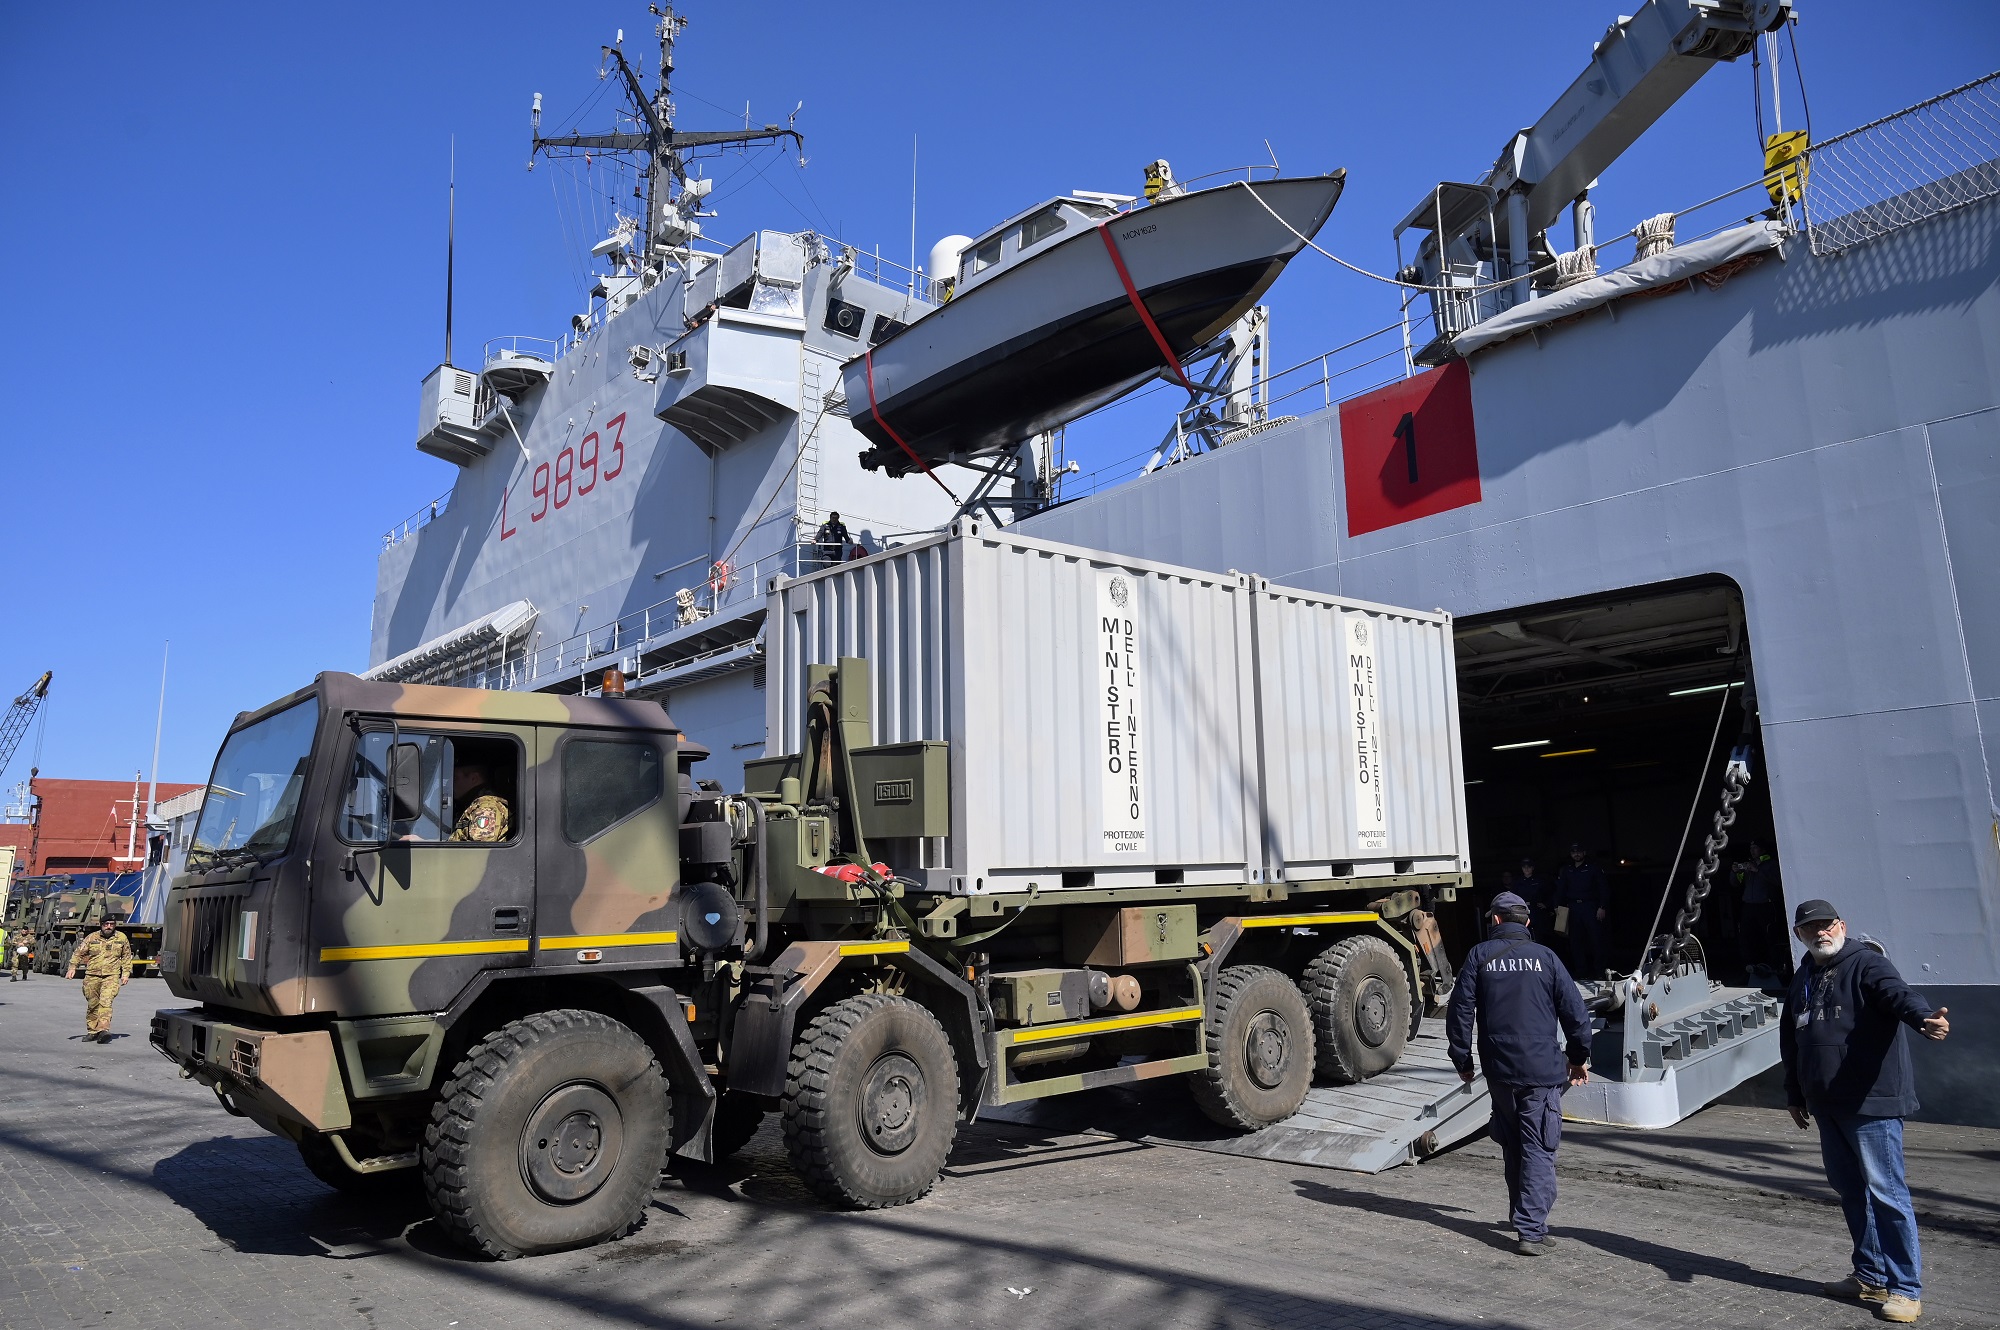 Italian Navy ship with humanitarian aid arrives in Beirut